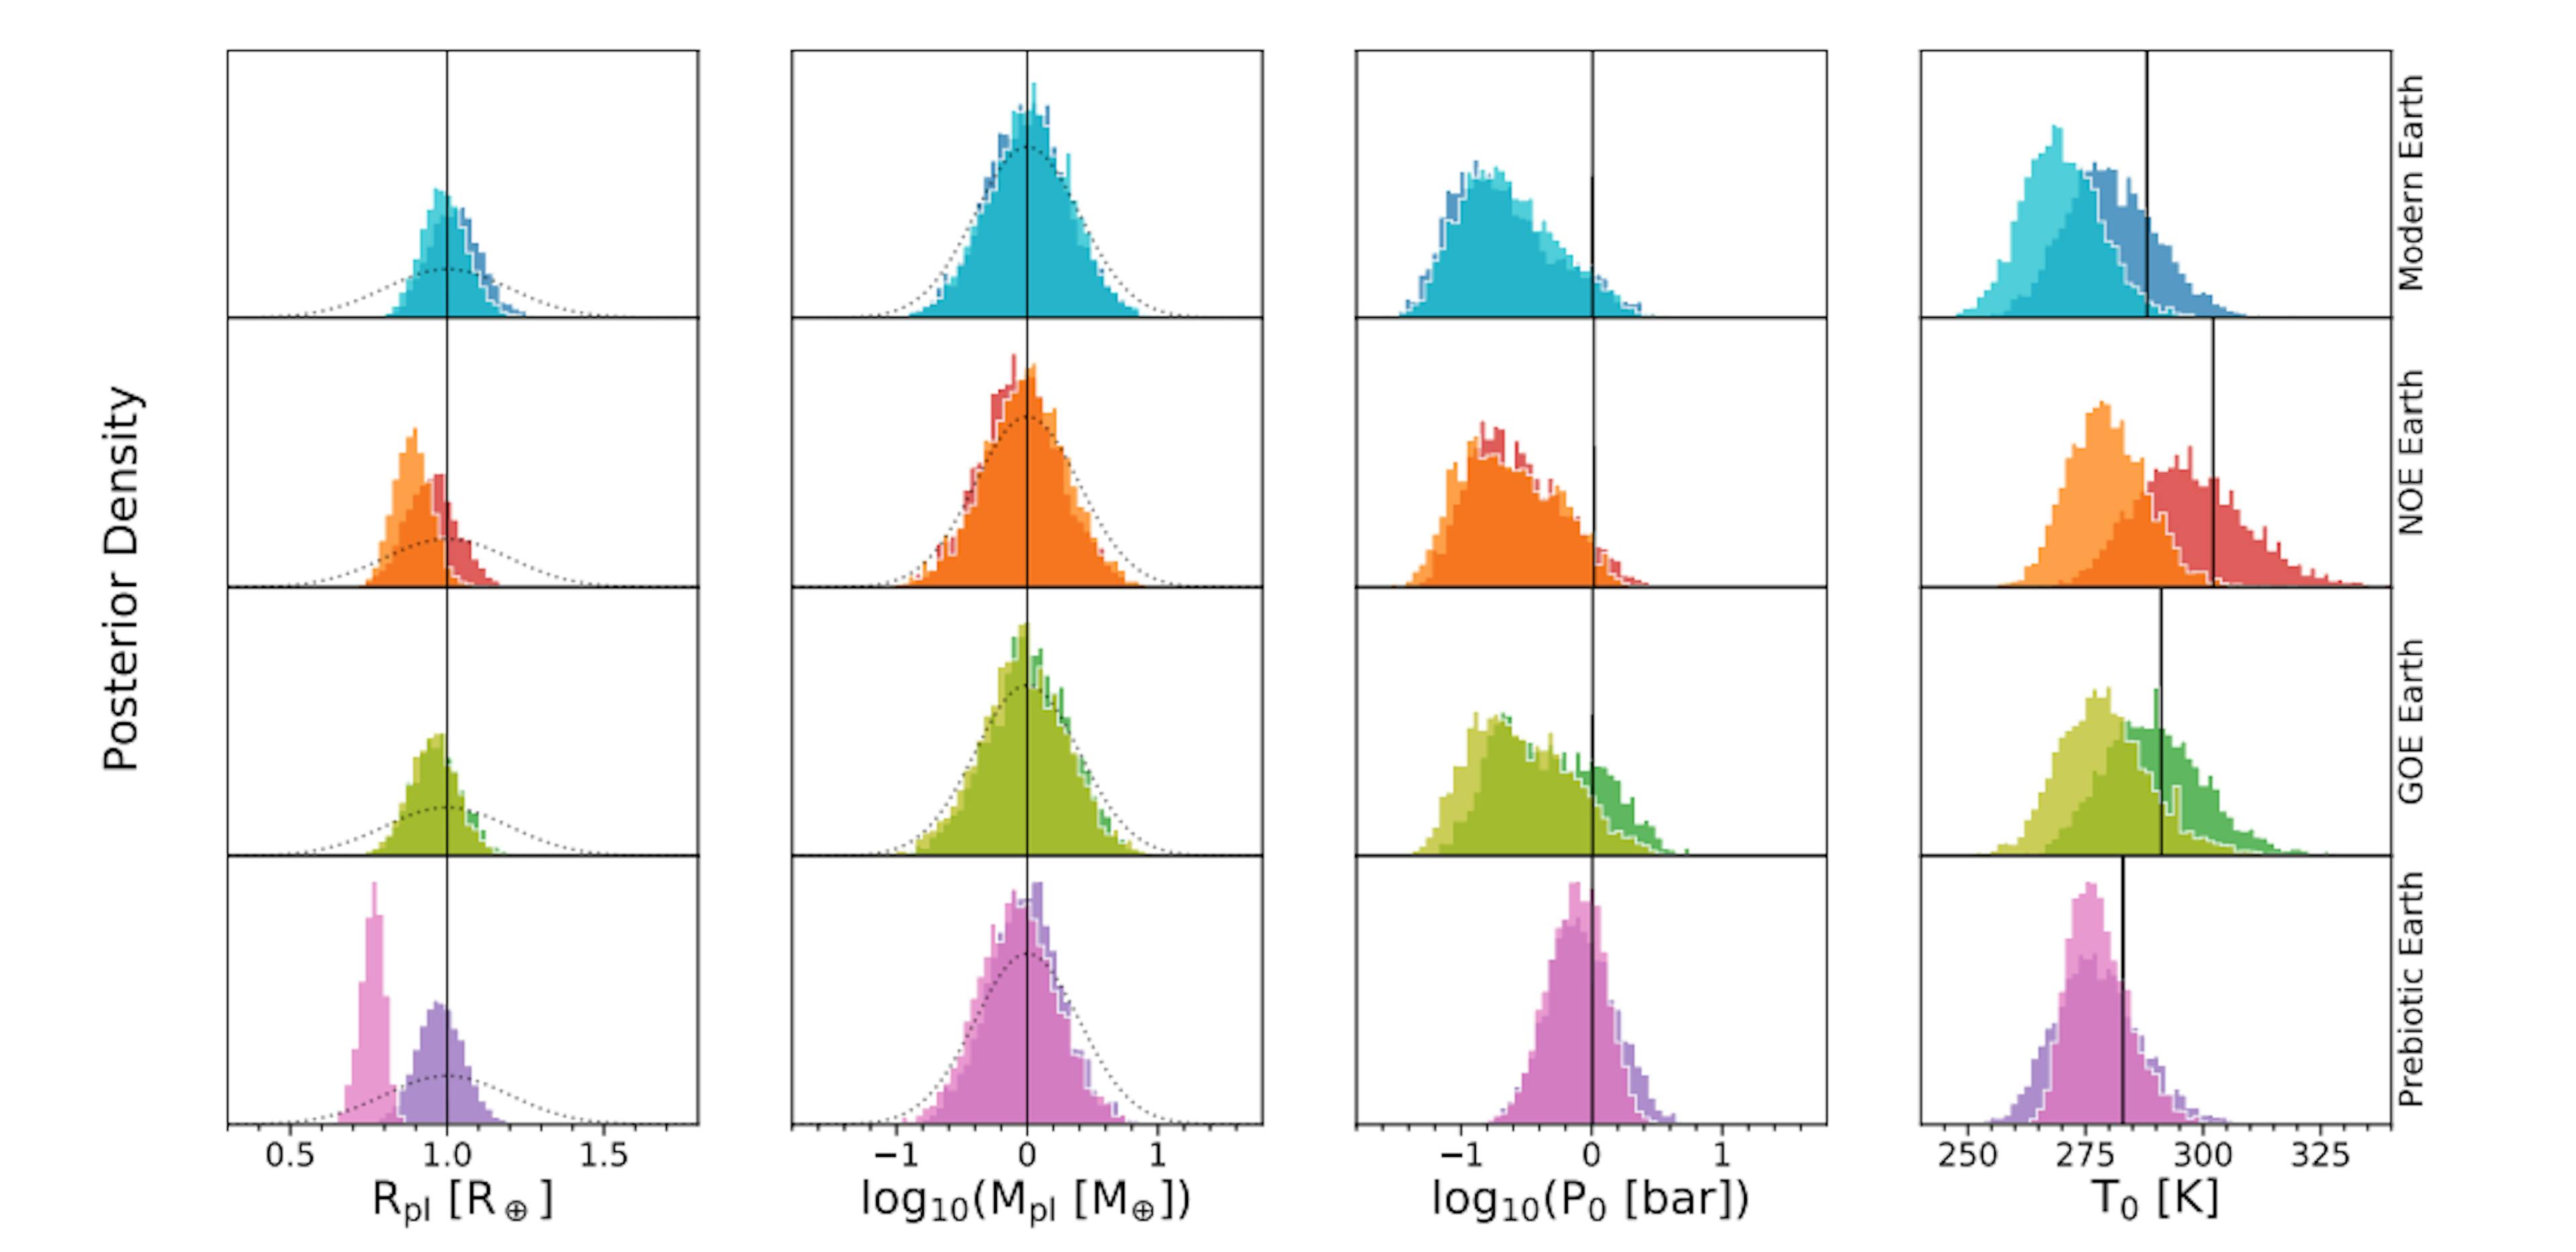 Fig. 4: Posterior density distributions for the retrieved exoplanet parameters (columns) for the different epochs (rows) and cloud coverages. We follow the color-coding listed in Table 1 to differentiate the different scenarios. The vertical, solid lines mark the true values for each parameter. The dotted lines in the Rpl and Mpl plots indicate the assumed Gaussian priors. For P0 and T0 we assume broad, flat priors which are not plotted.